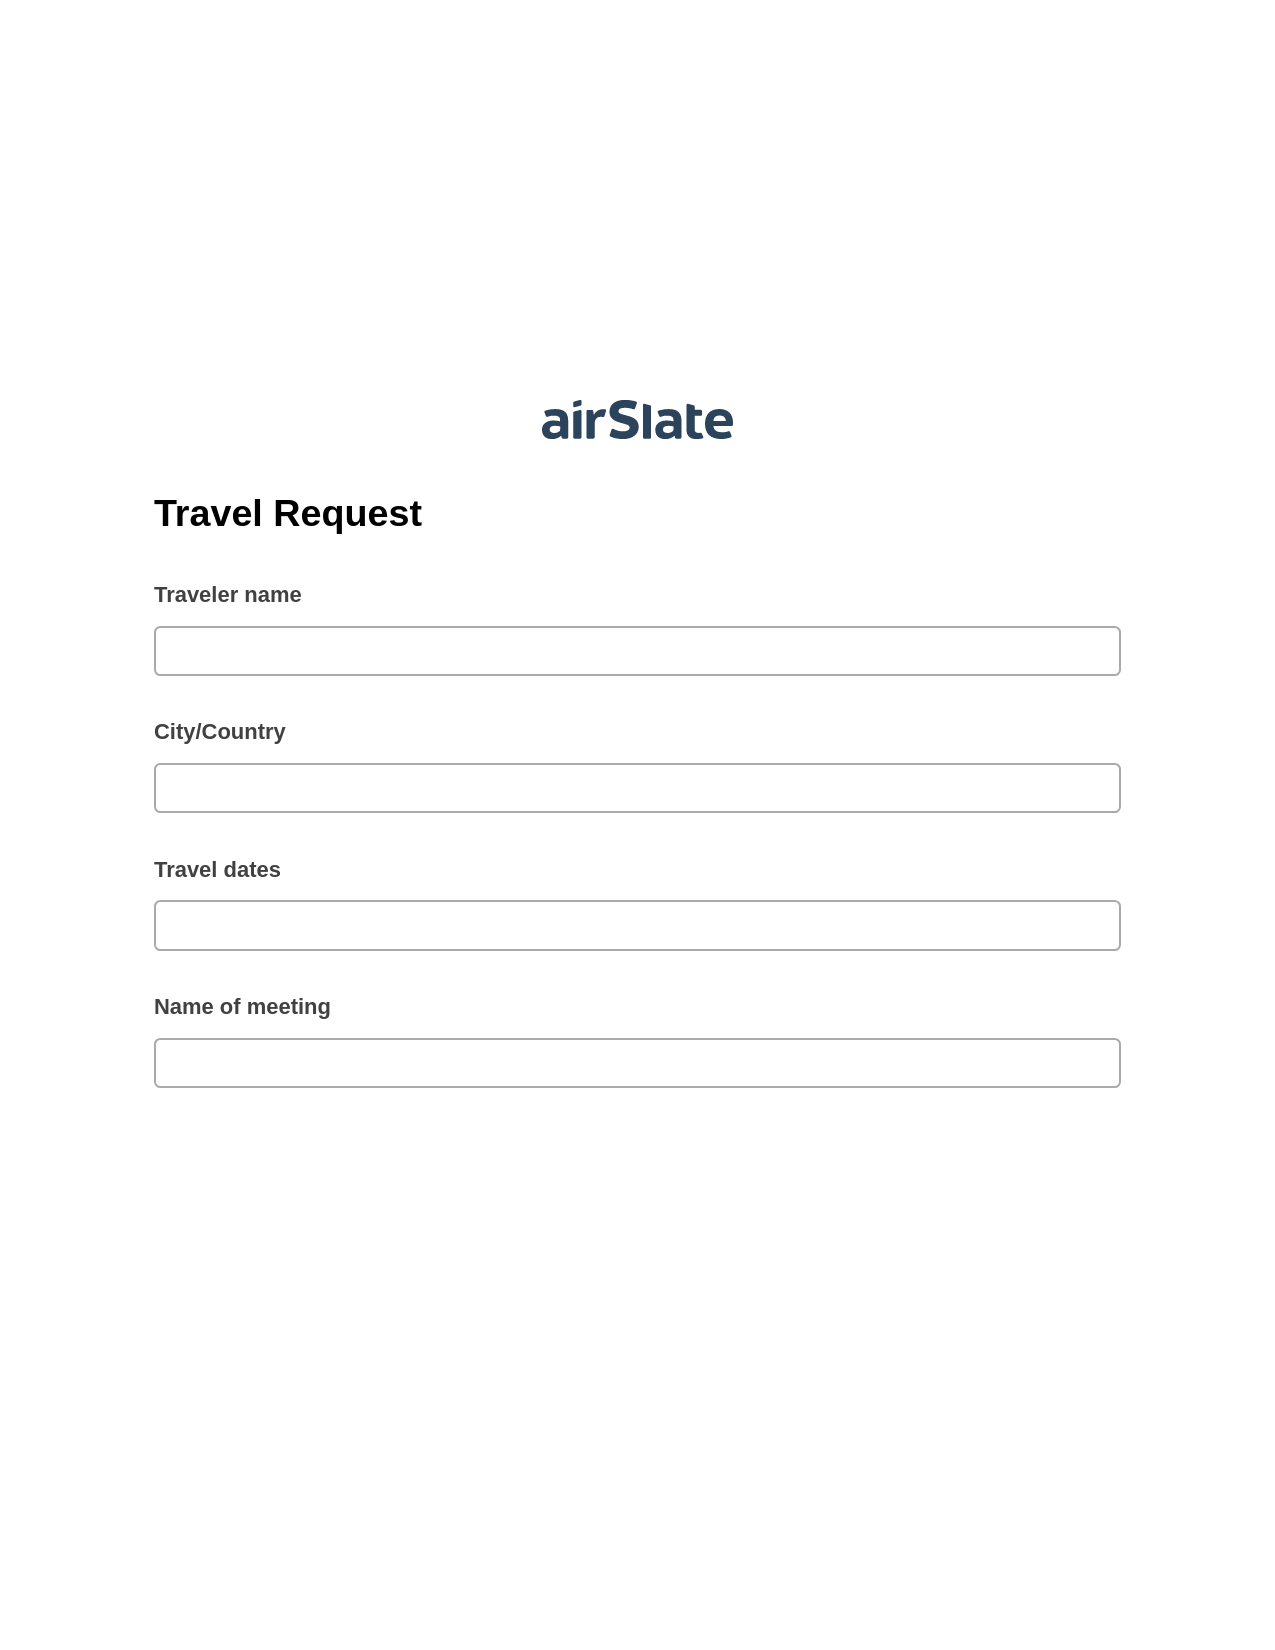 Travel Request Pre-fill Document Bot, Create Salesforce Record Bot, Post-finish Document Bot